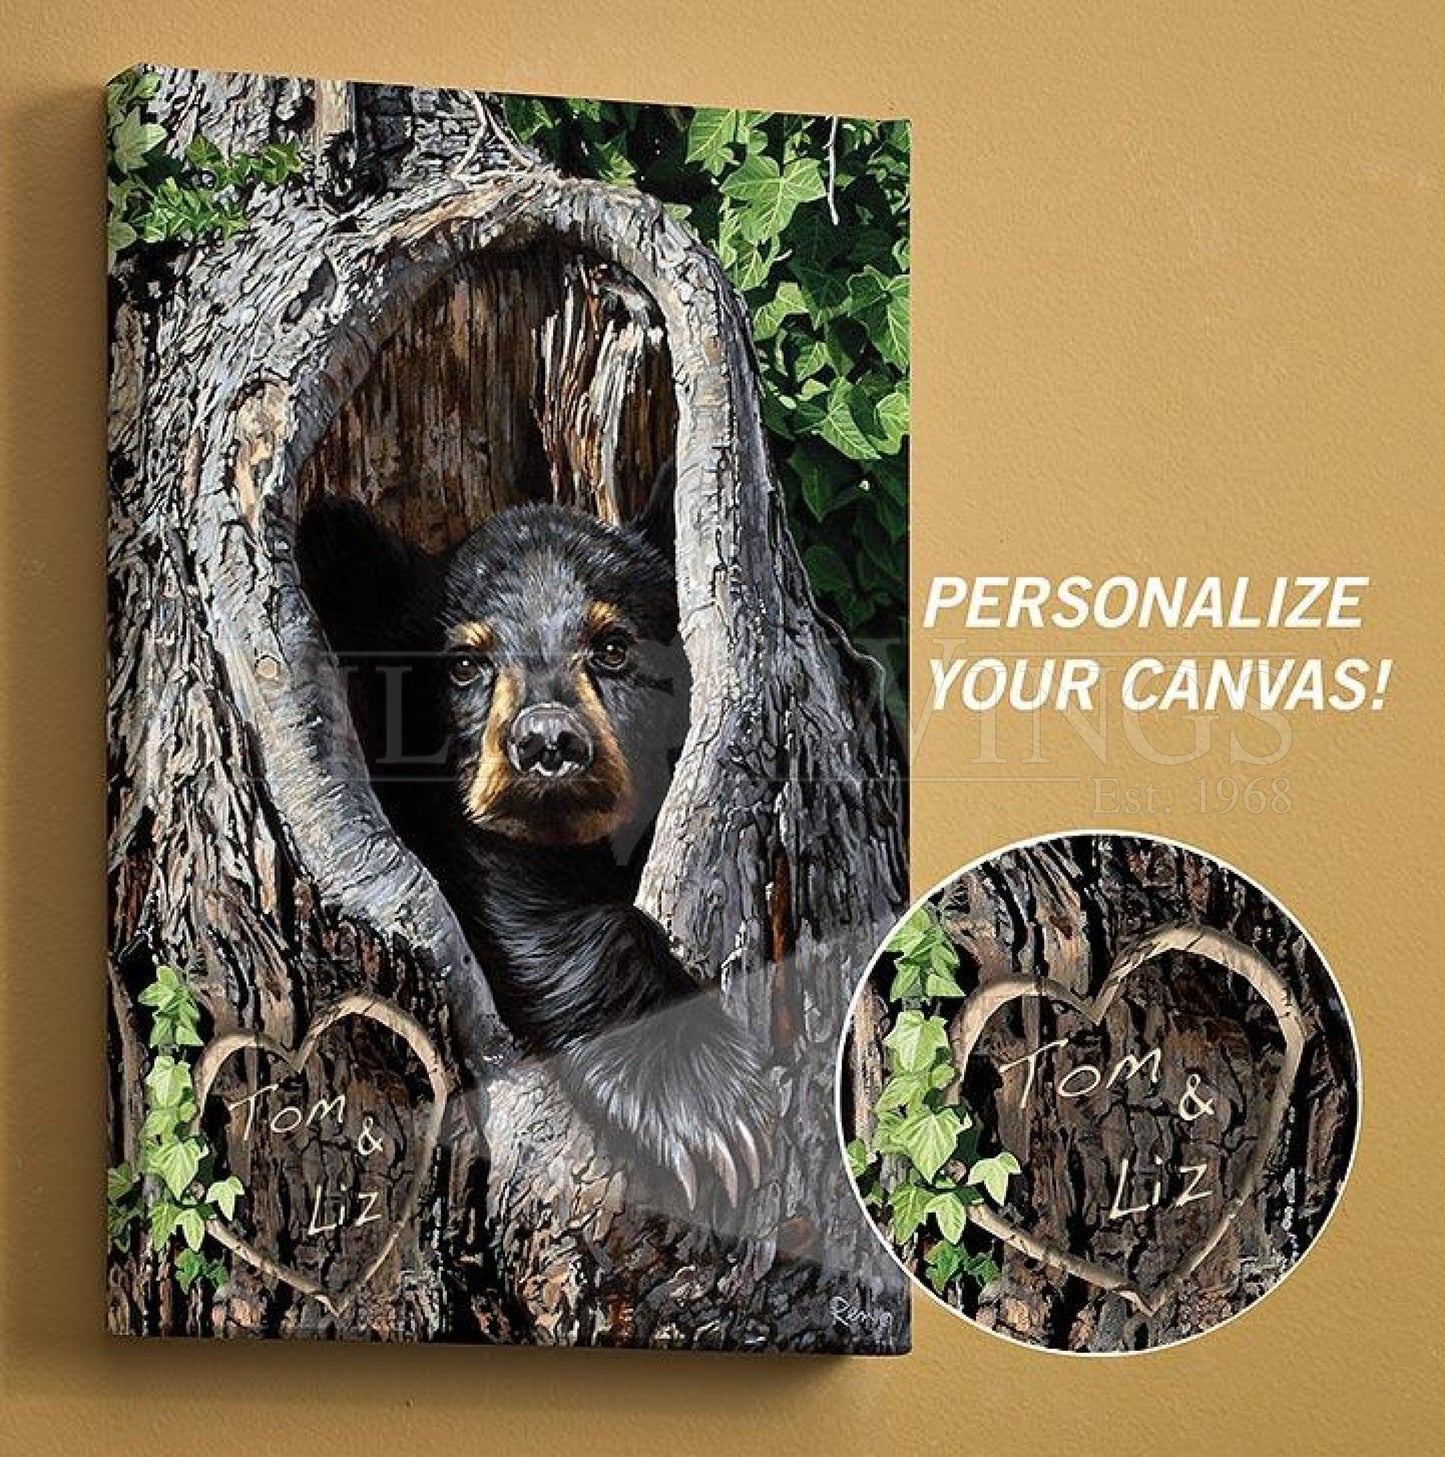 cubby-holemdashblack-bear-personalized-wrapped-canvas18h-x-13w-art-collection_303.jpg